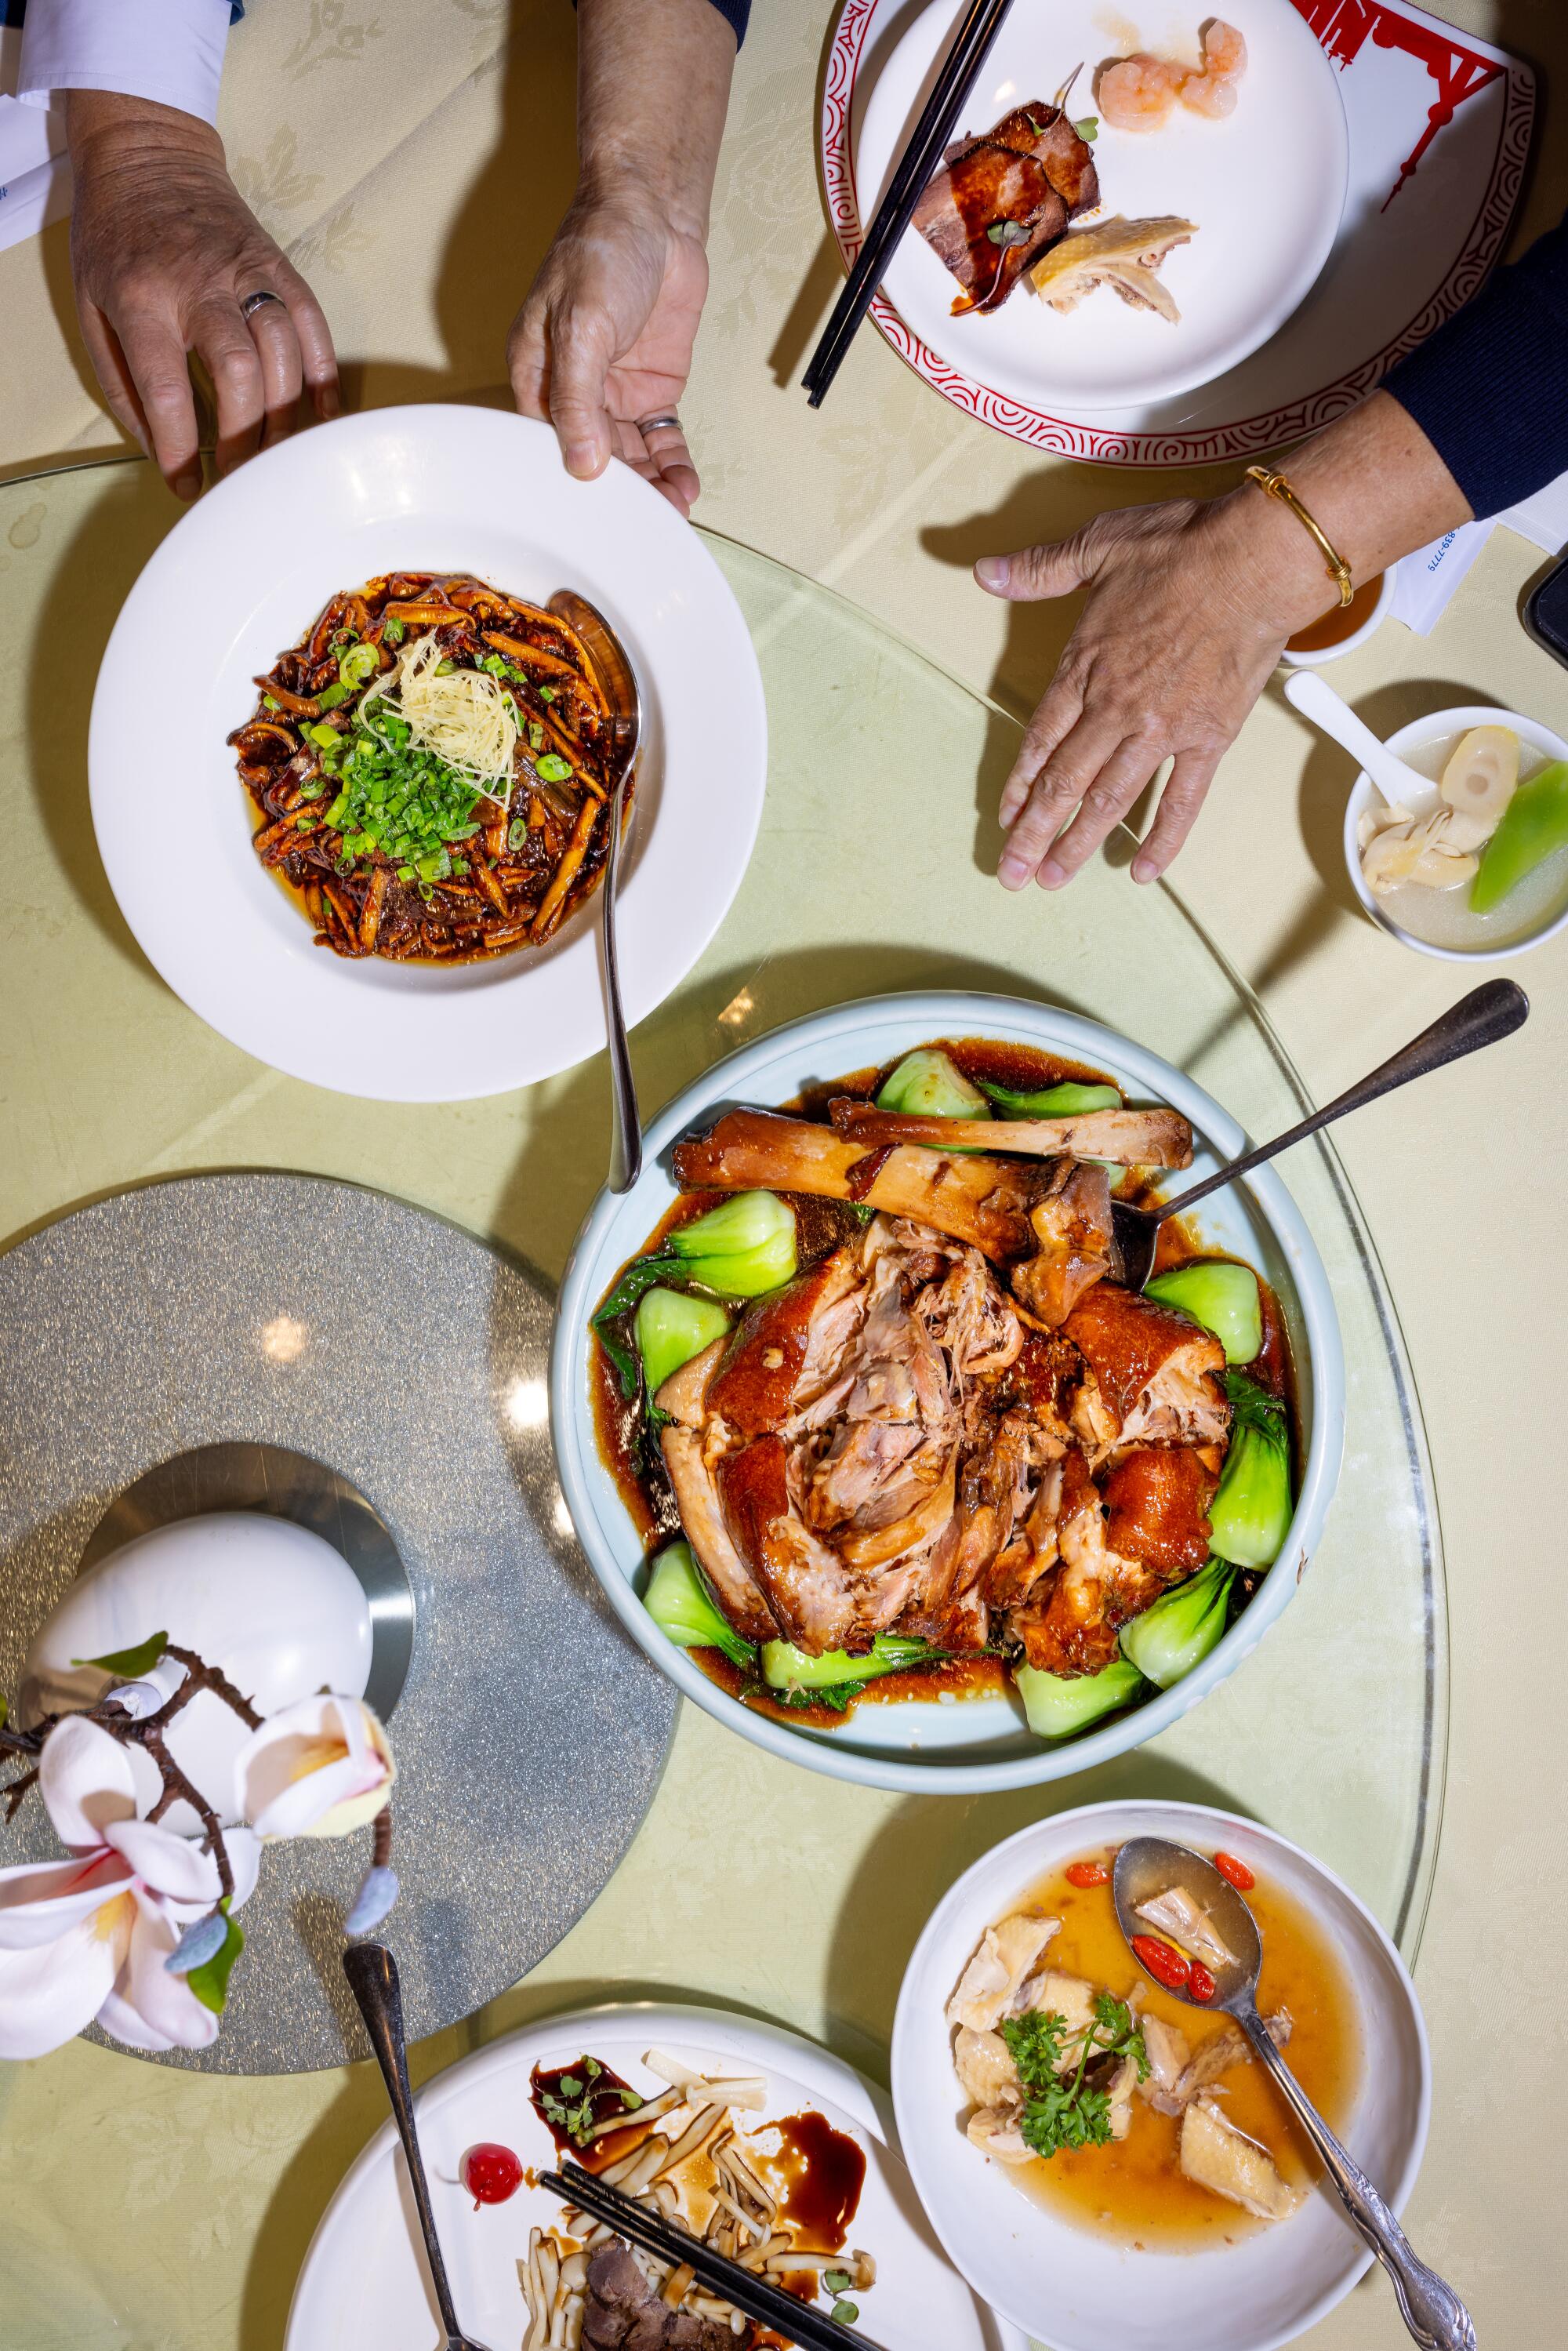 A selection of dishes including, at the center, the Shanghai trotter, and to the left, the sauteed eels. 